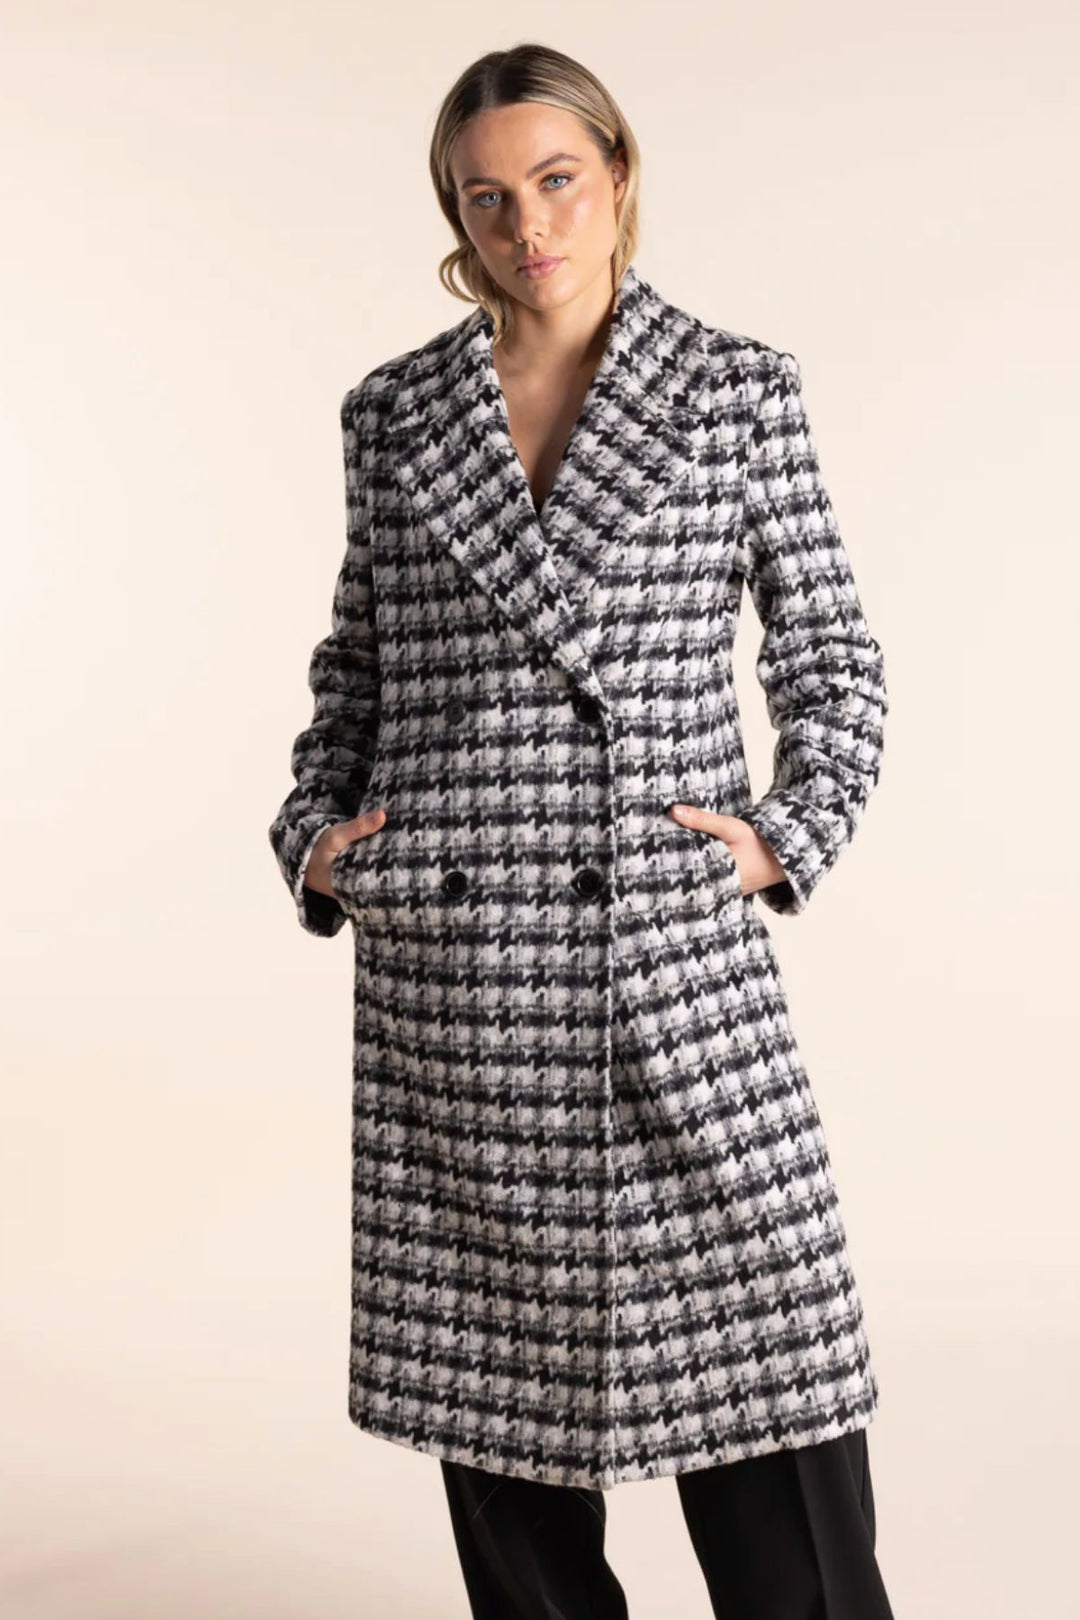 Brand : Two T's Long Check Coat Style Code : 2550 Colour : White/Black check Fabric : Main 95% Polyester 5% Wool,  Lining 97% Polyester 3% Elastane Double Breasted Lined Below the knee length Pockets